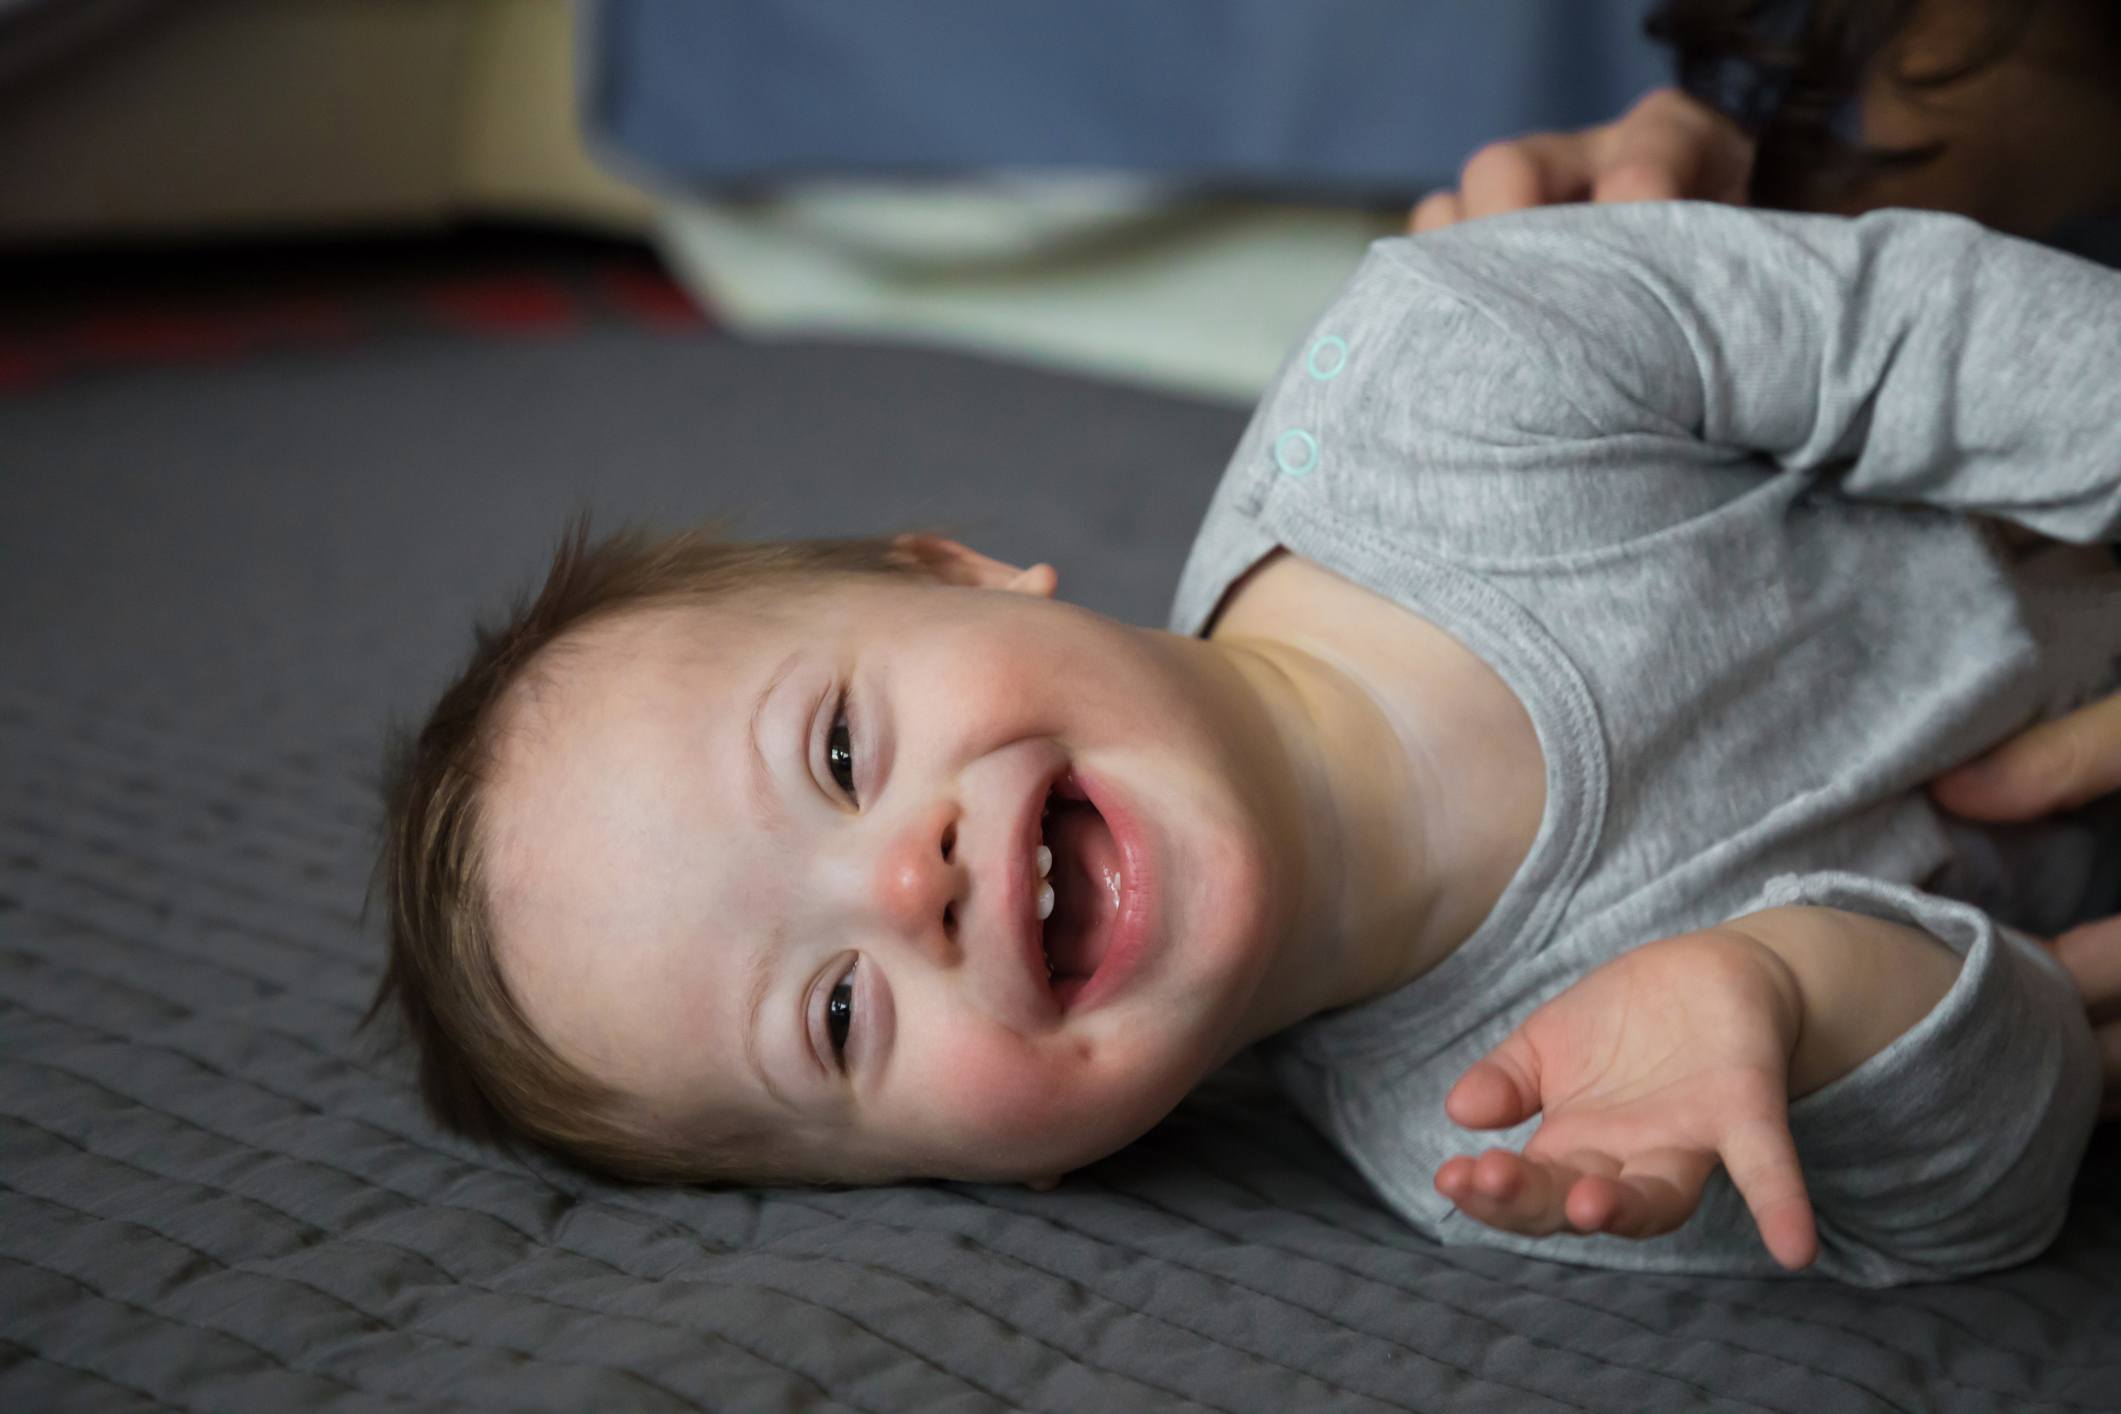 This Adorable 18-Month Old Baby With Down Syndrome Just ...